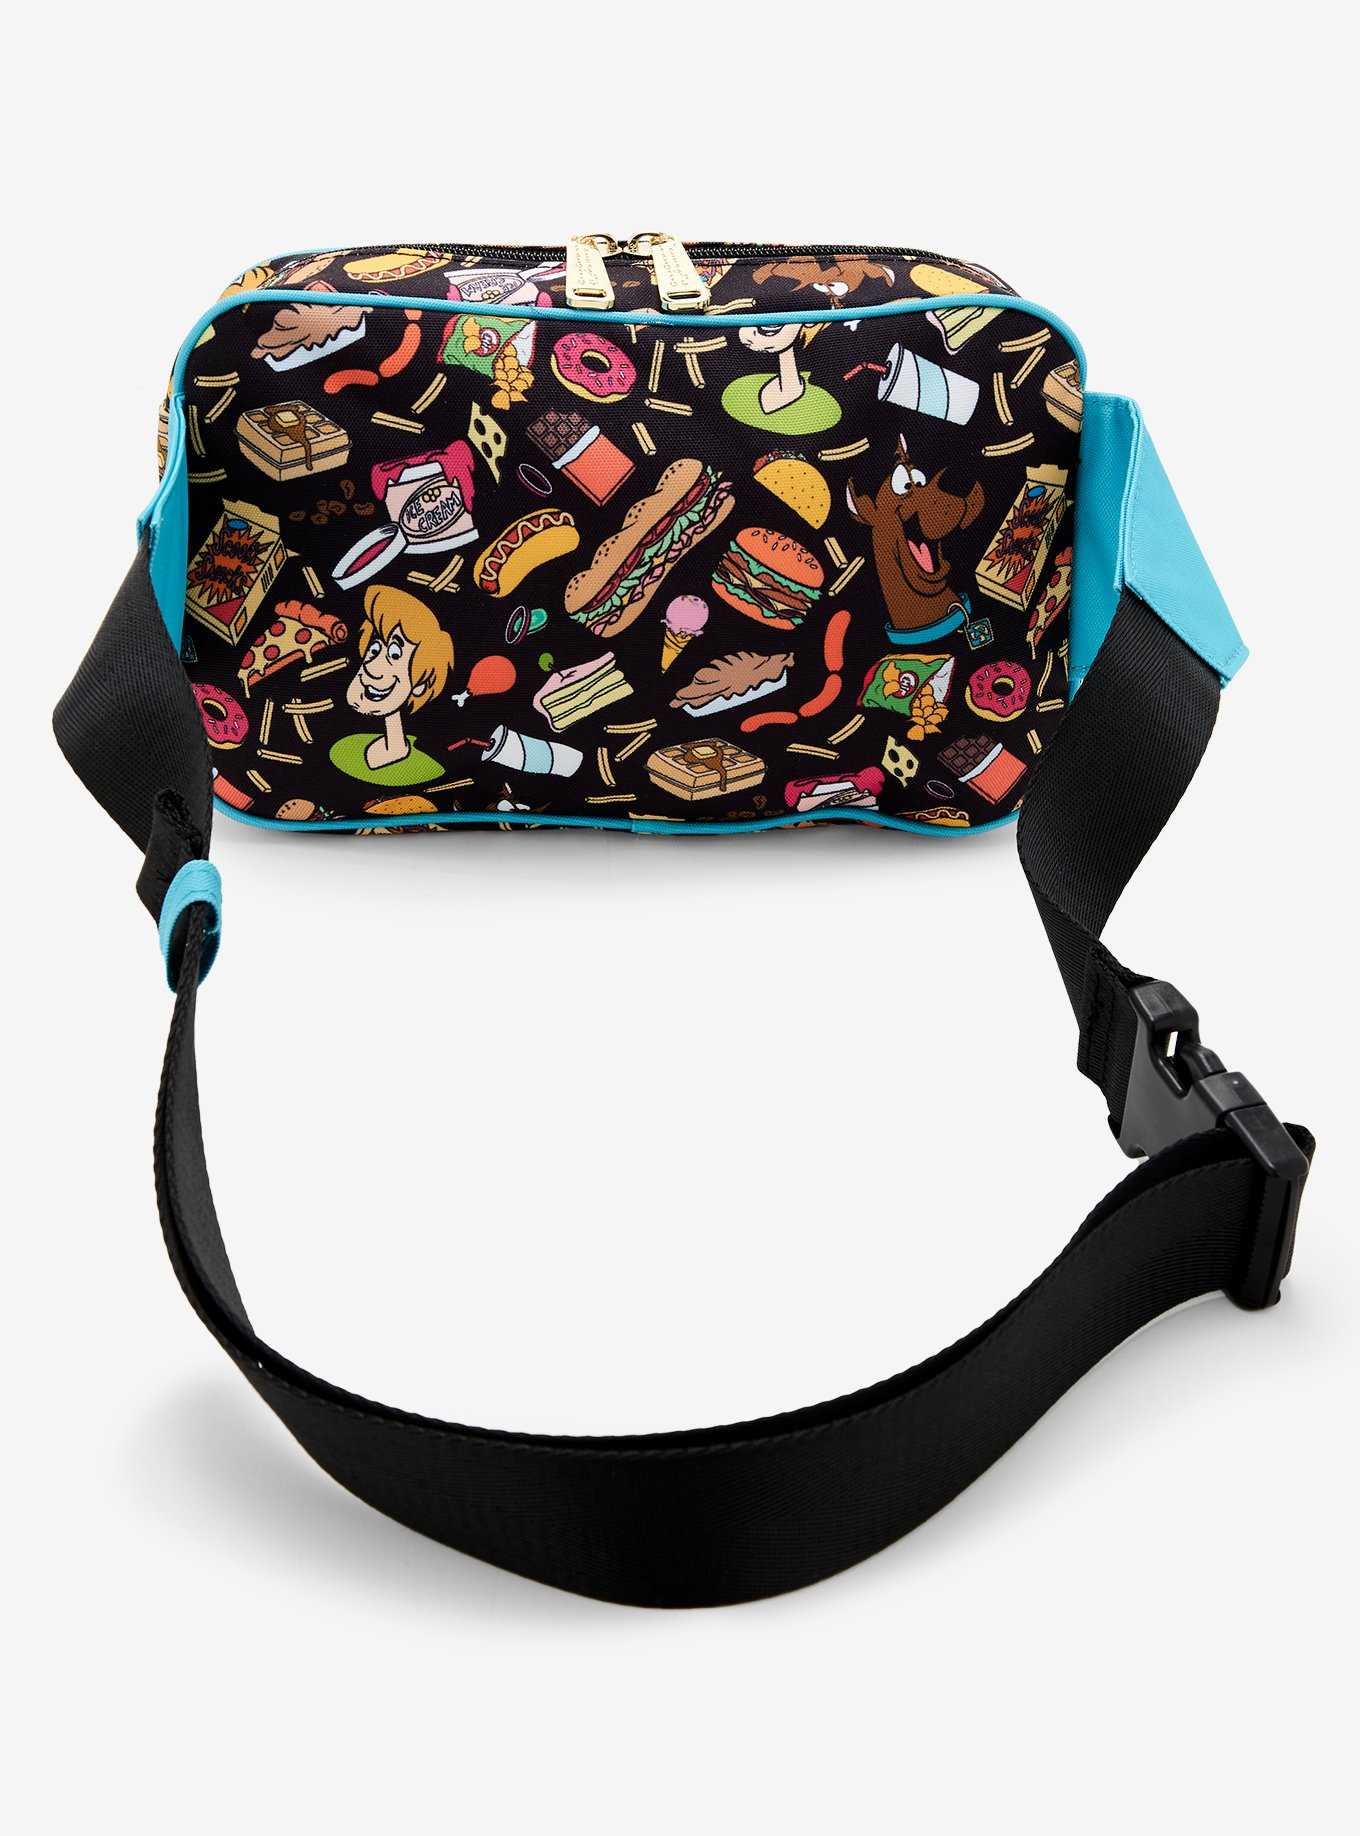 Loungefly Scooby-Doo! Junk Food Fanny Pack, , hi-res